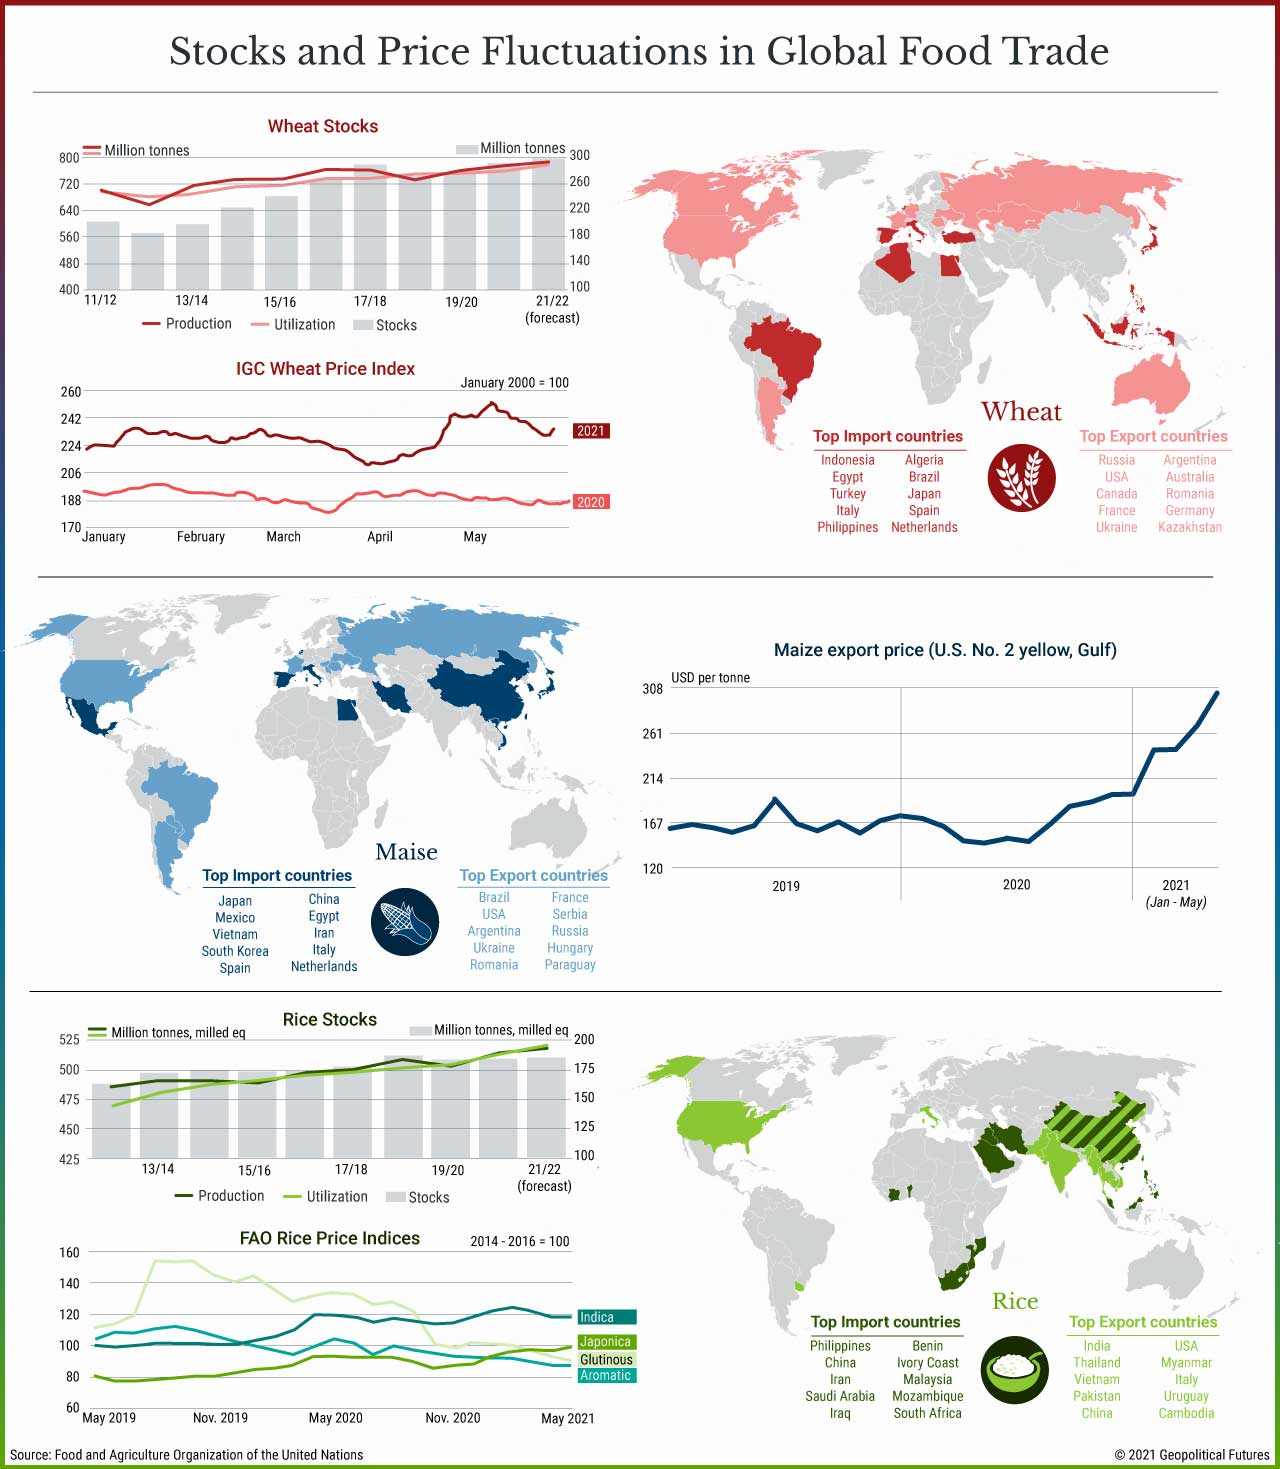 Stocks and Price Fluctuations in Global Food Trade